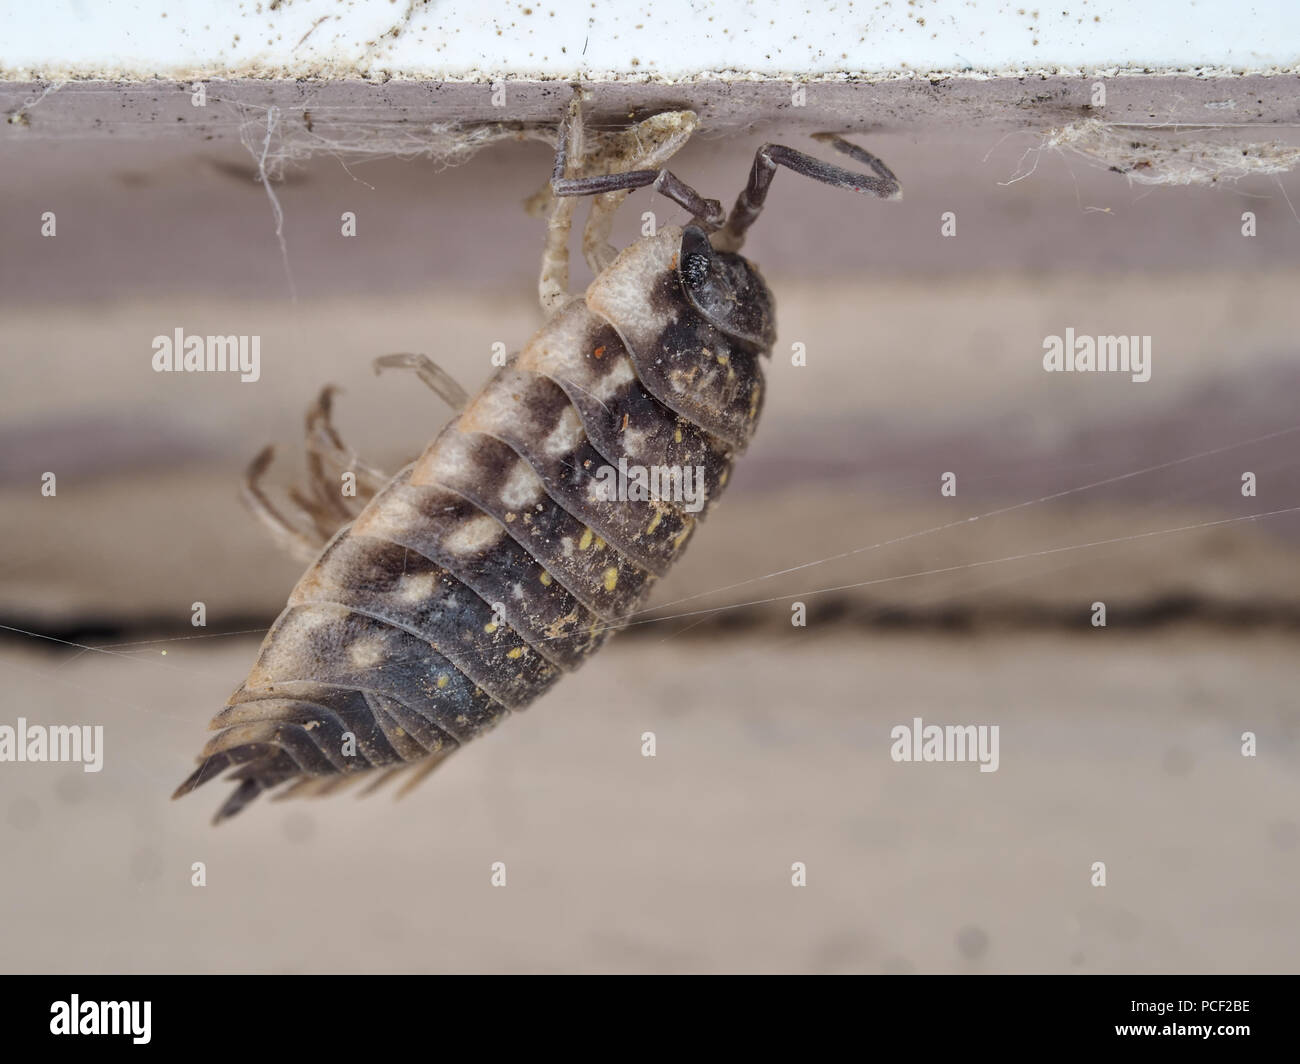 Woodlouse exoskeleton attached to a building wall Stock Photo